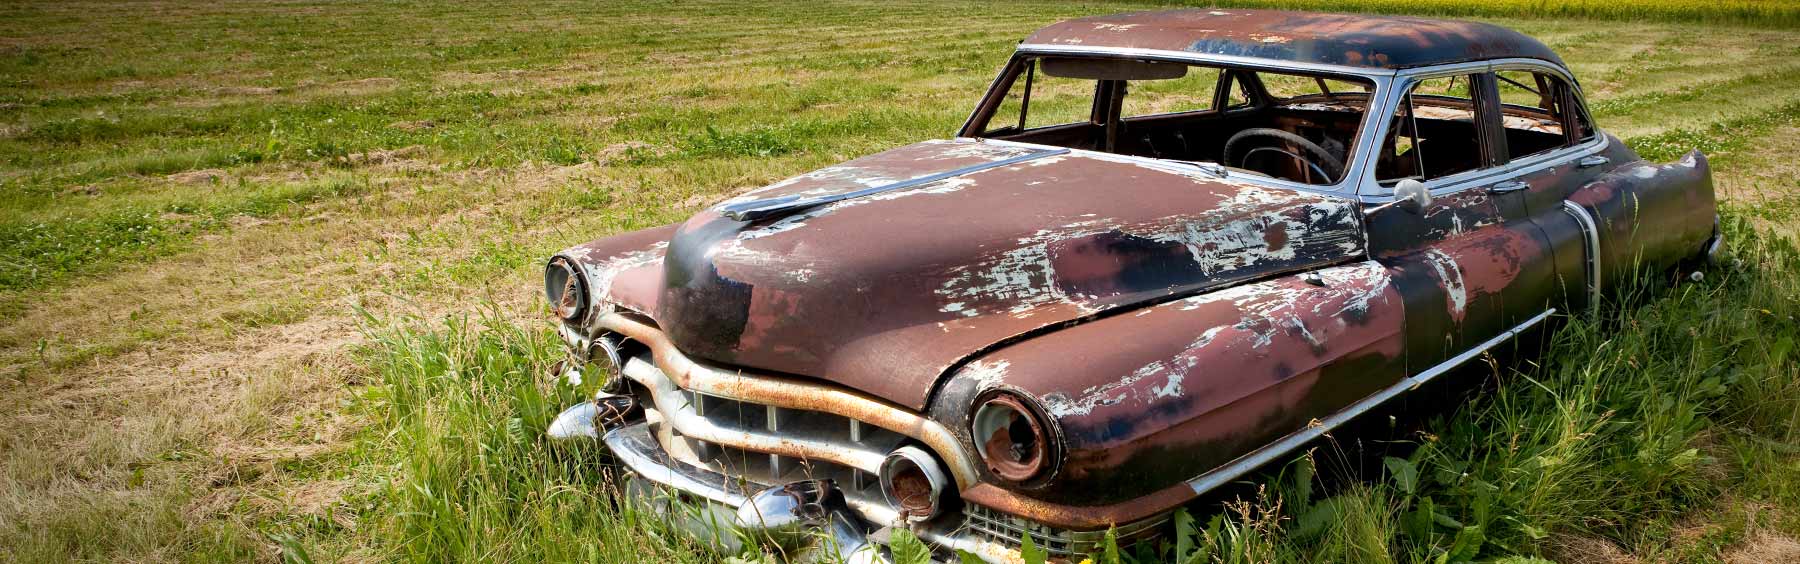 scrap old cars for cash